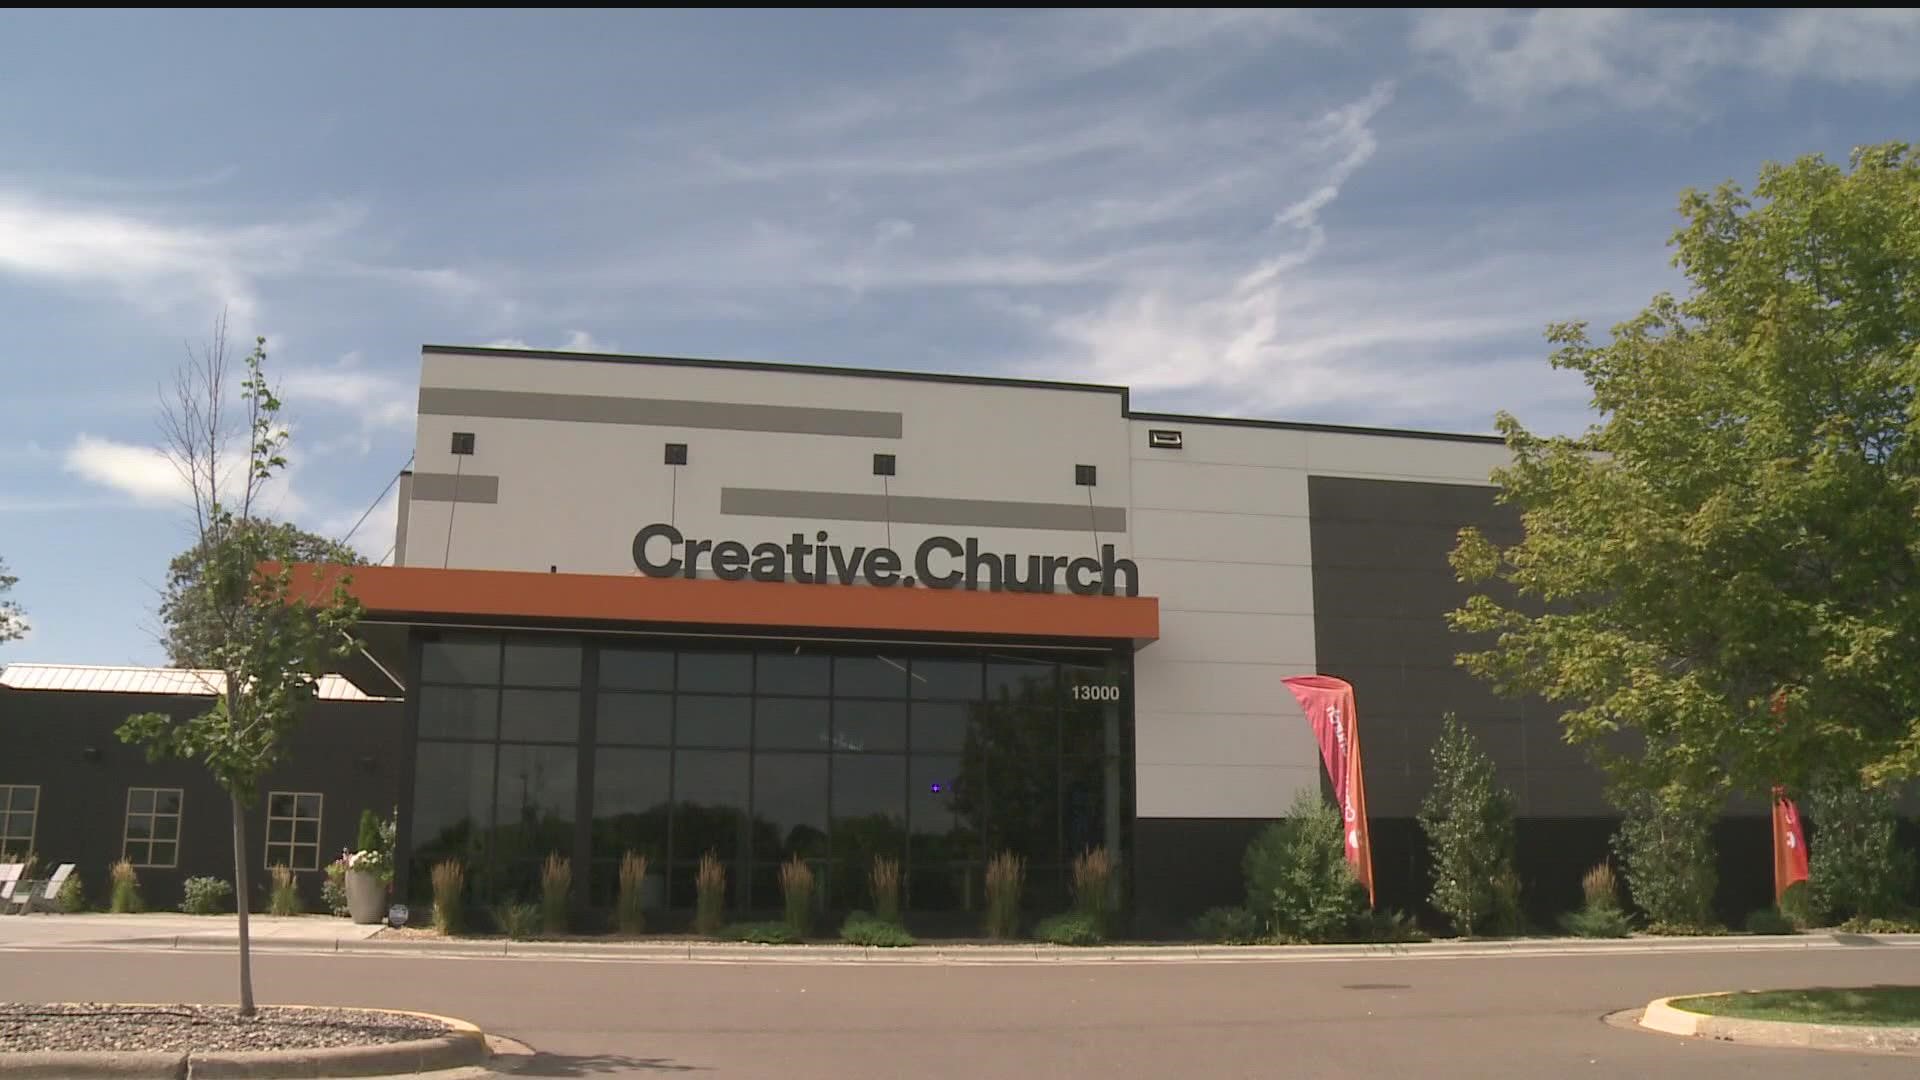 This Sunday, Creative Church in Fridley and Maple Grove is giving one free ticket to each new visitor ages 13 and up.